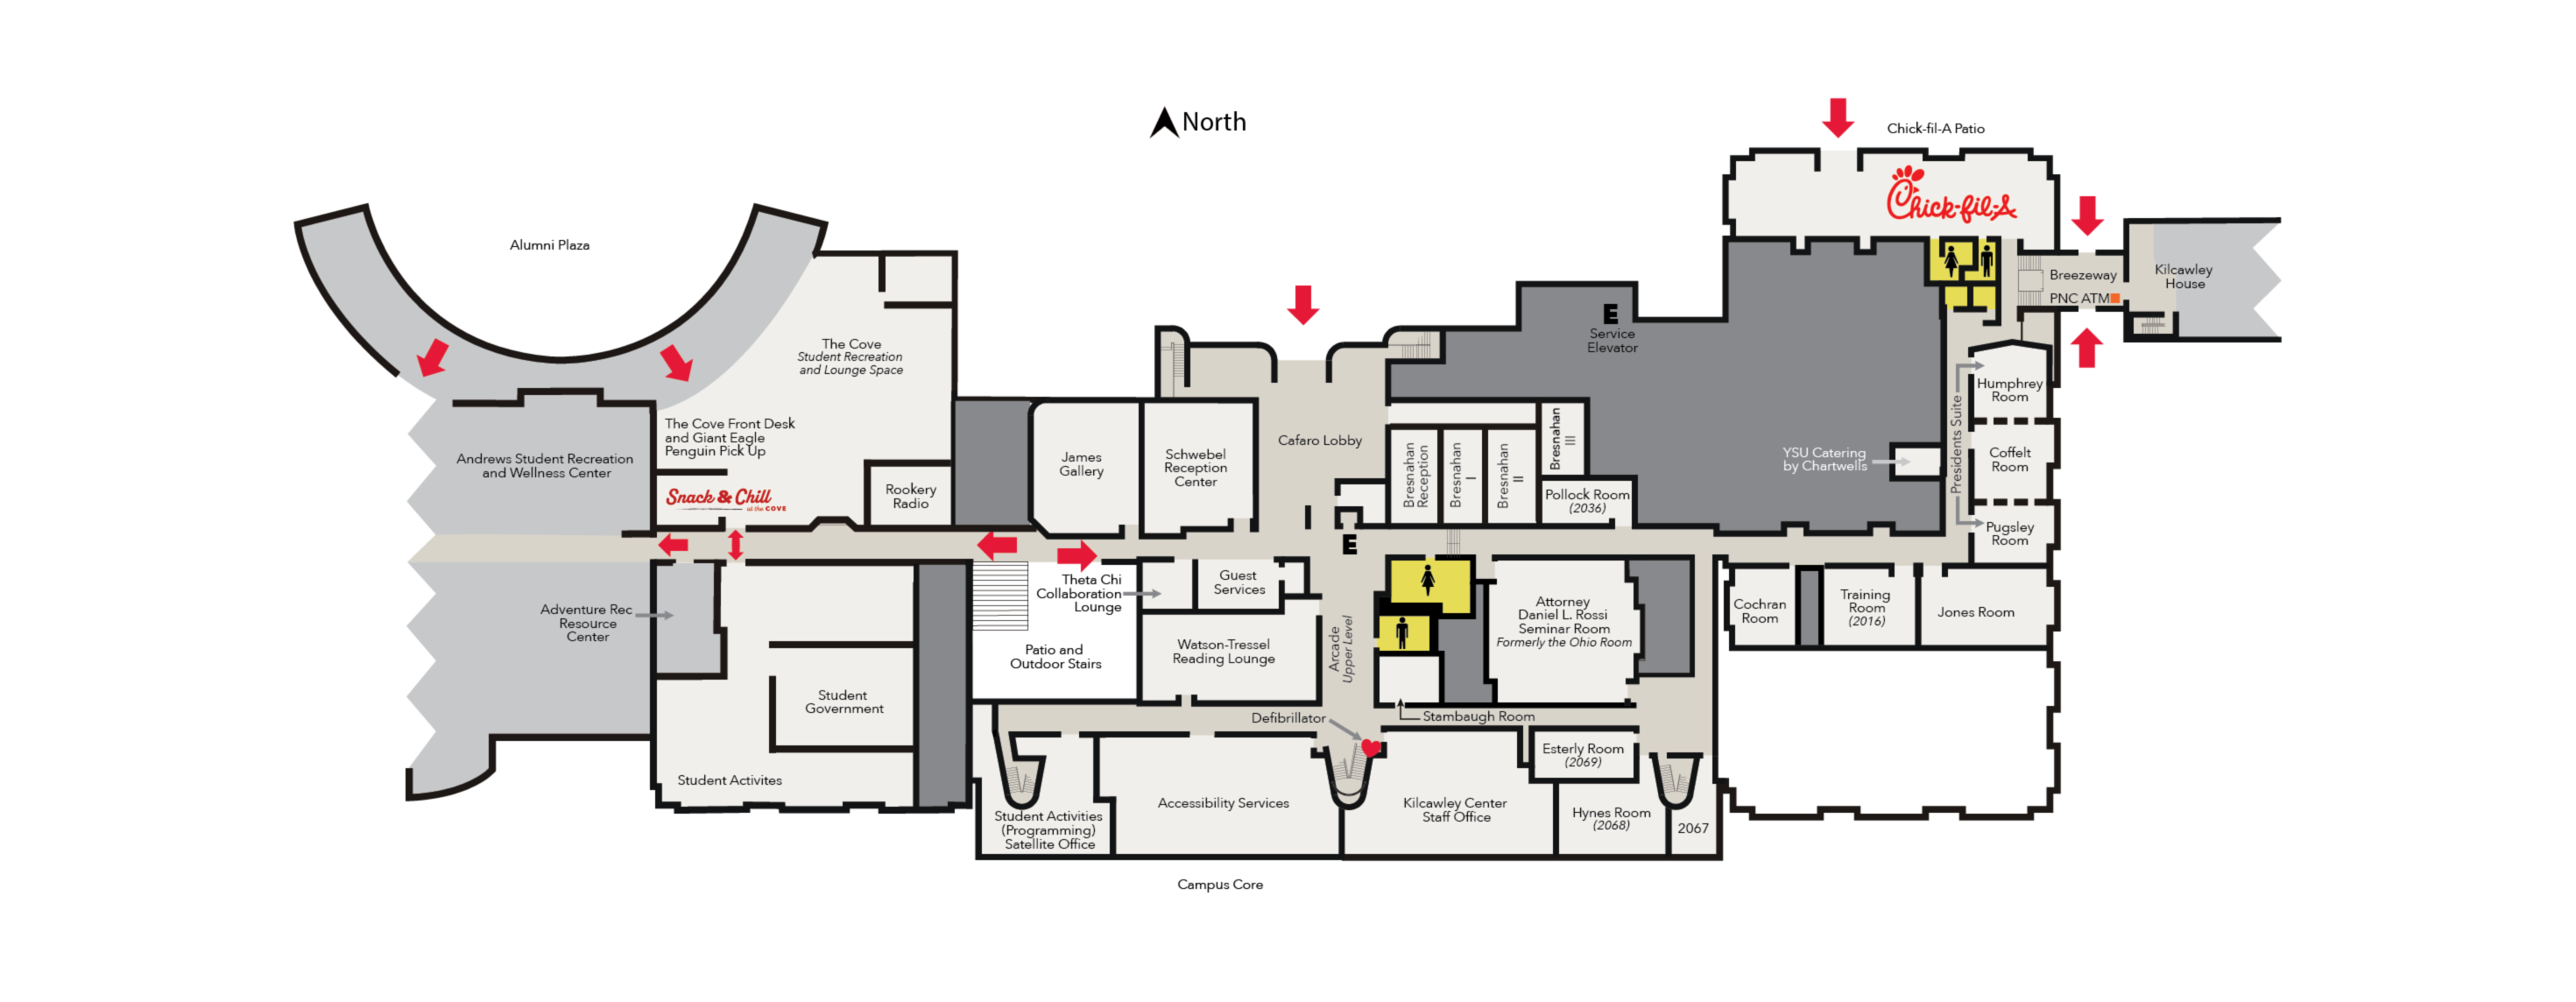 map of upper level of kilcawley center with room names, and restaurant names etc…